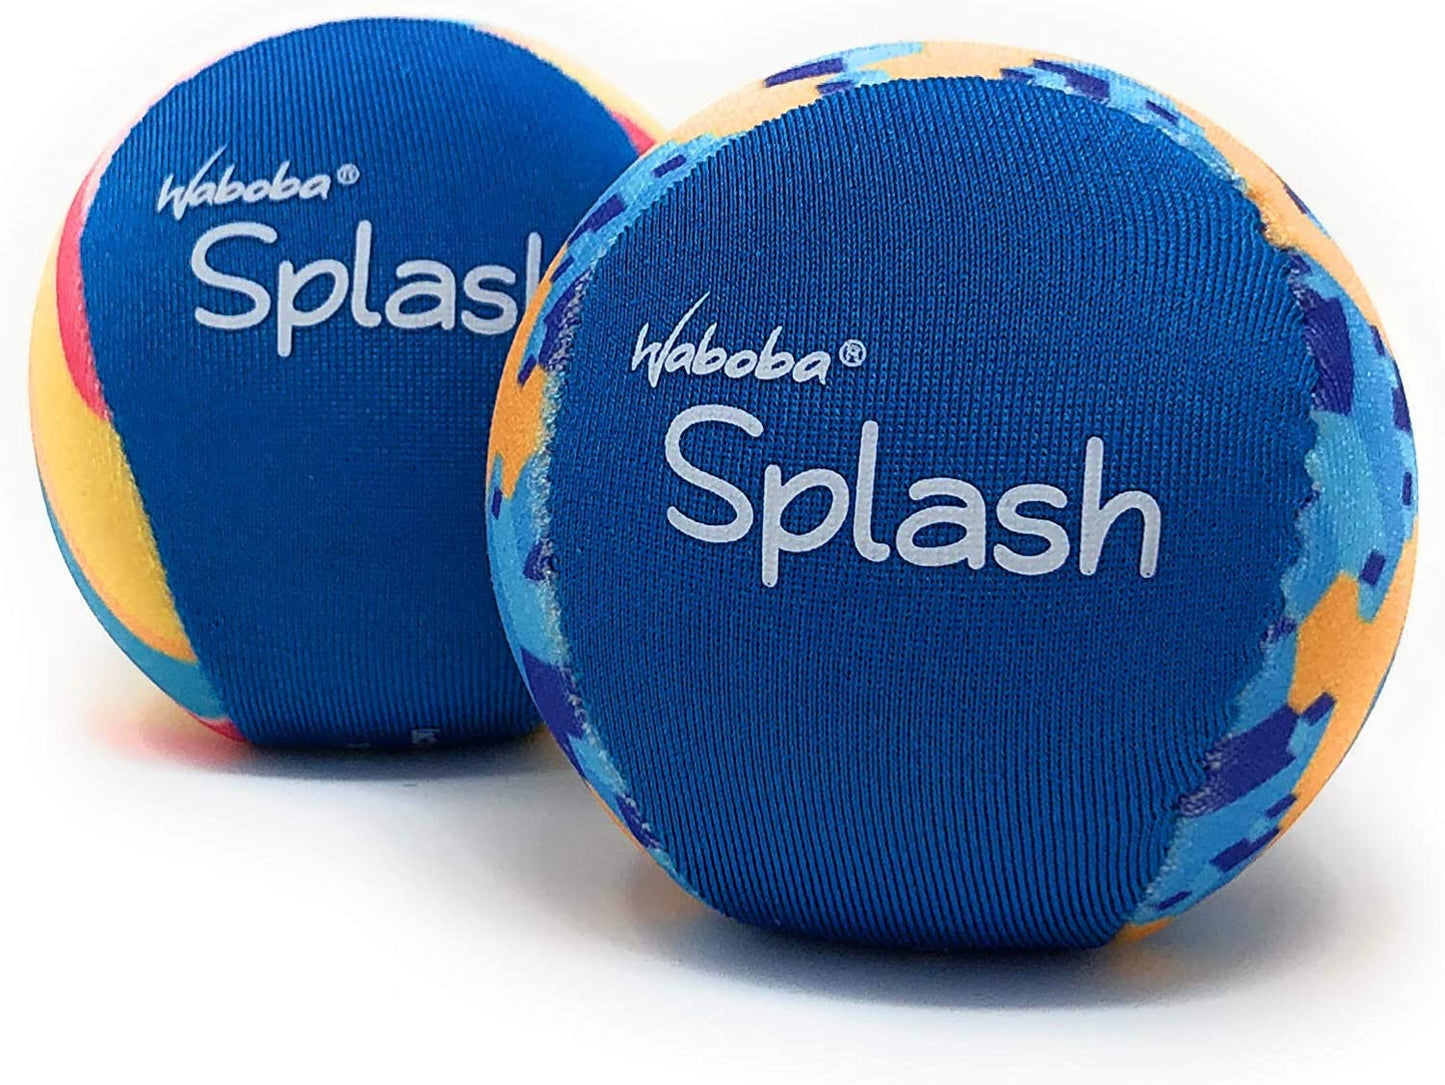 Splash Water Bouncing Ball (Colors May Vary) (Double Pack)